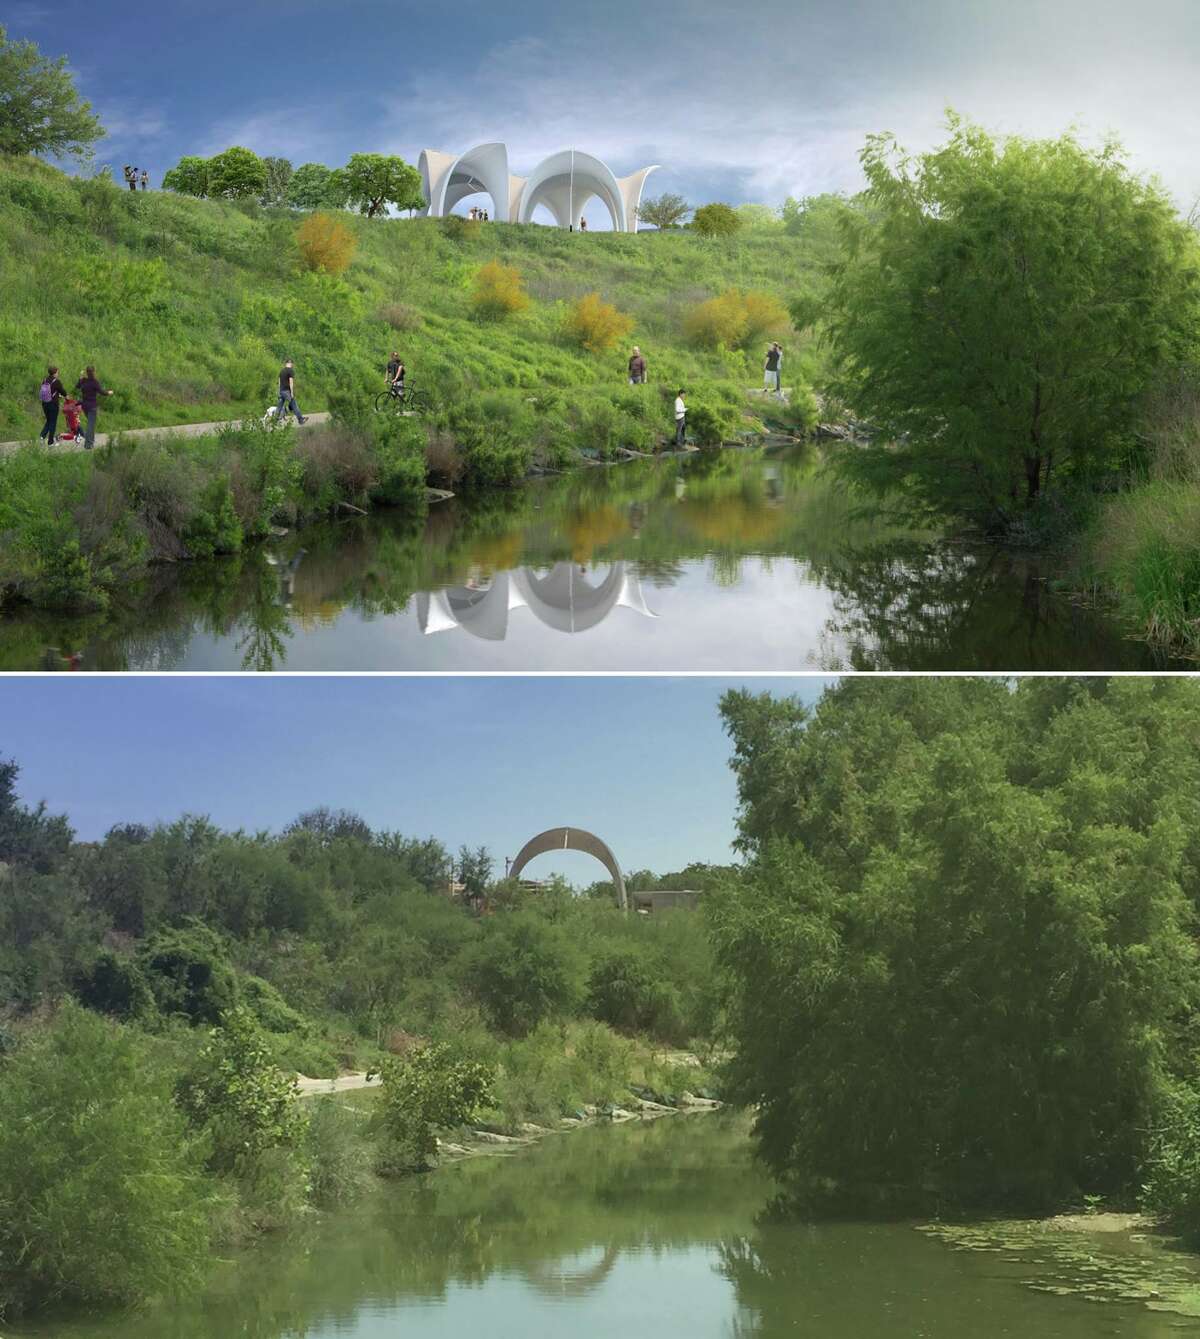 The top photo shows a rendering of what Confluence Park will look like when construction is finished, and the bottom photo shows park of a pavilion put up in July 2017.